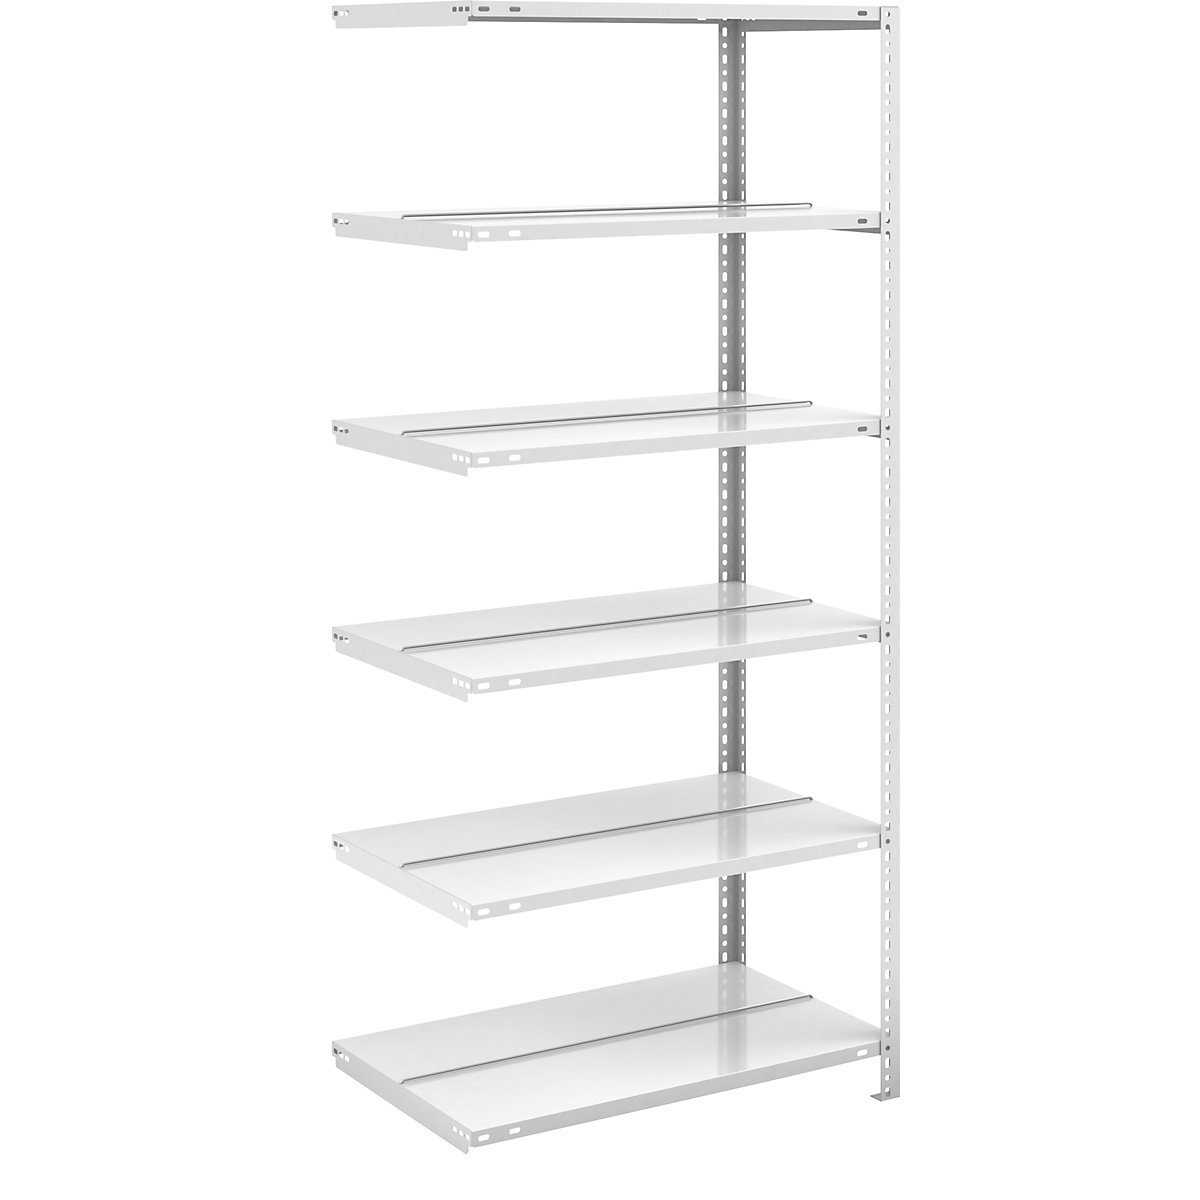 Bolt-together archive shelving, light grey RAL 7035 – hofe, shelf height 1850 mm, double sided, extension shelf, width x depth 750 x 600 mm-7